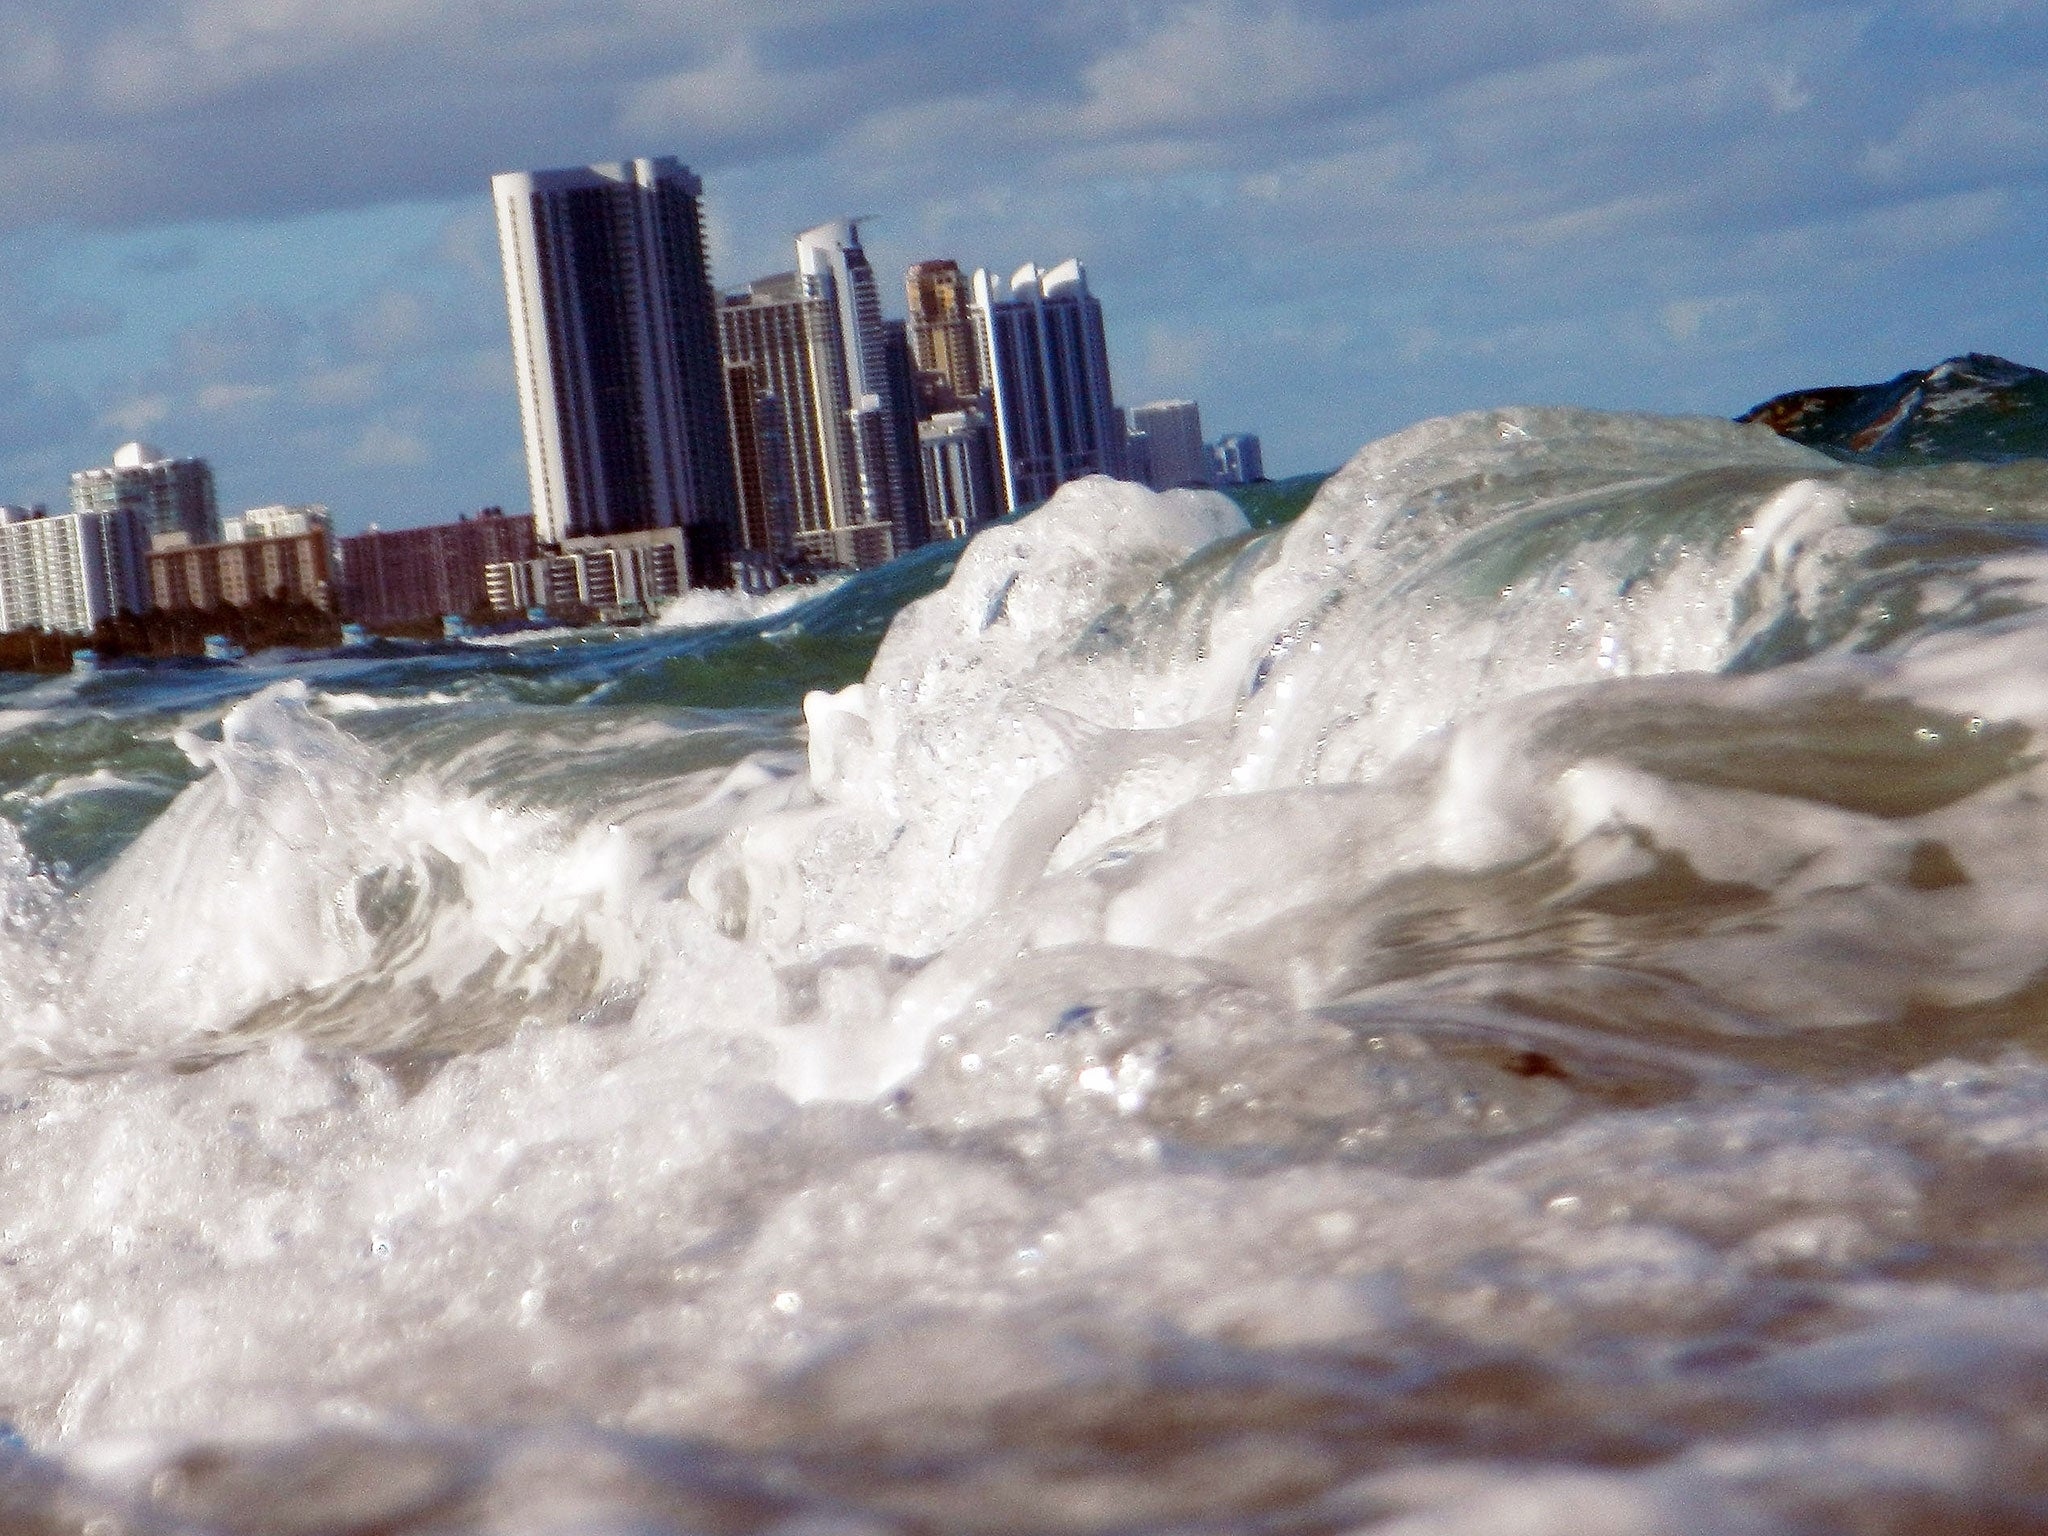 The surge in sea levels in the coming decades will continue a trend that began around 1950, when levels began to rise